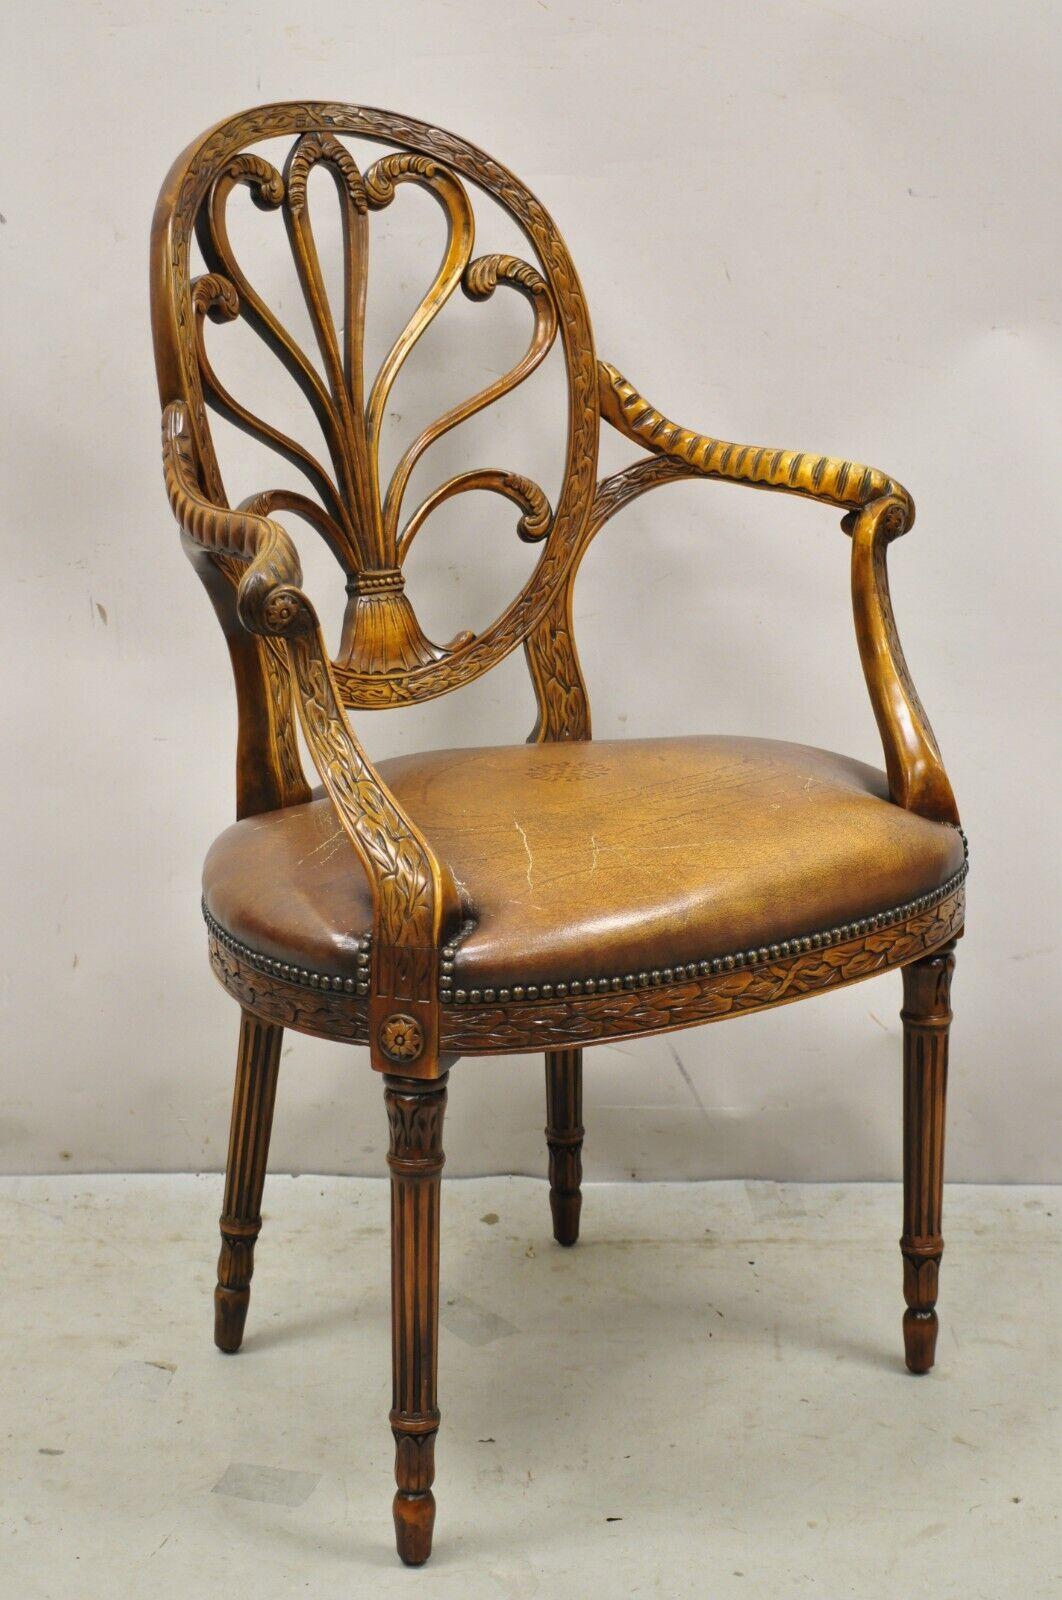 Theodore Alexander Neoclassical Regency Style Carved Open Back Arm Chair. Item features tooled leather seat, solid wood frame, beautiful wood grain nicely carved details, quality craftsmanship, great style and form. Circa Late 20th - 21st Century.